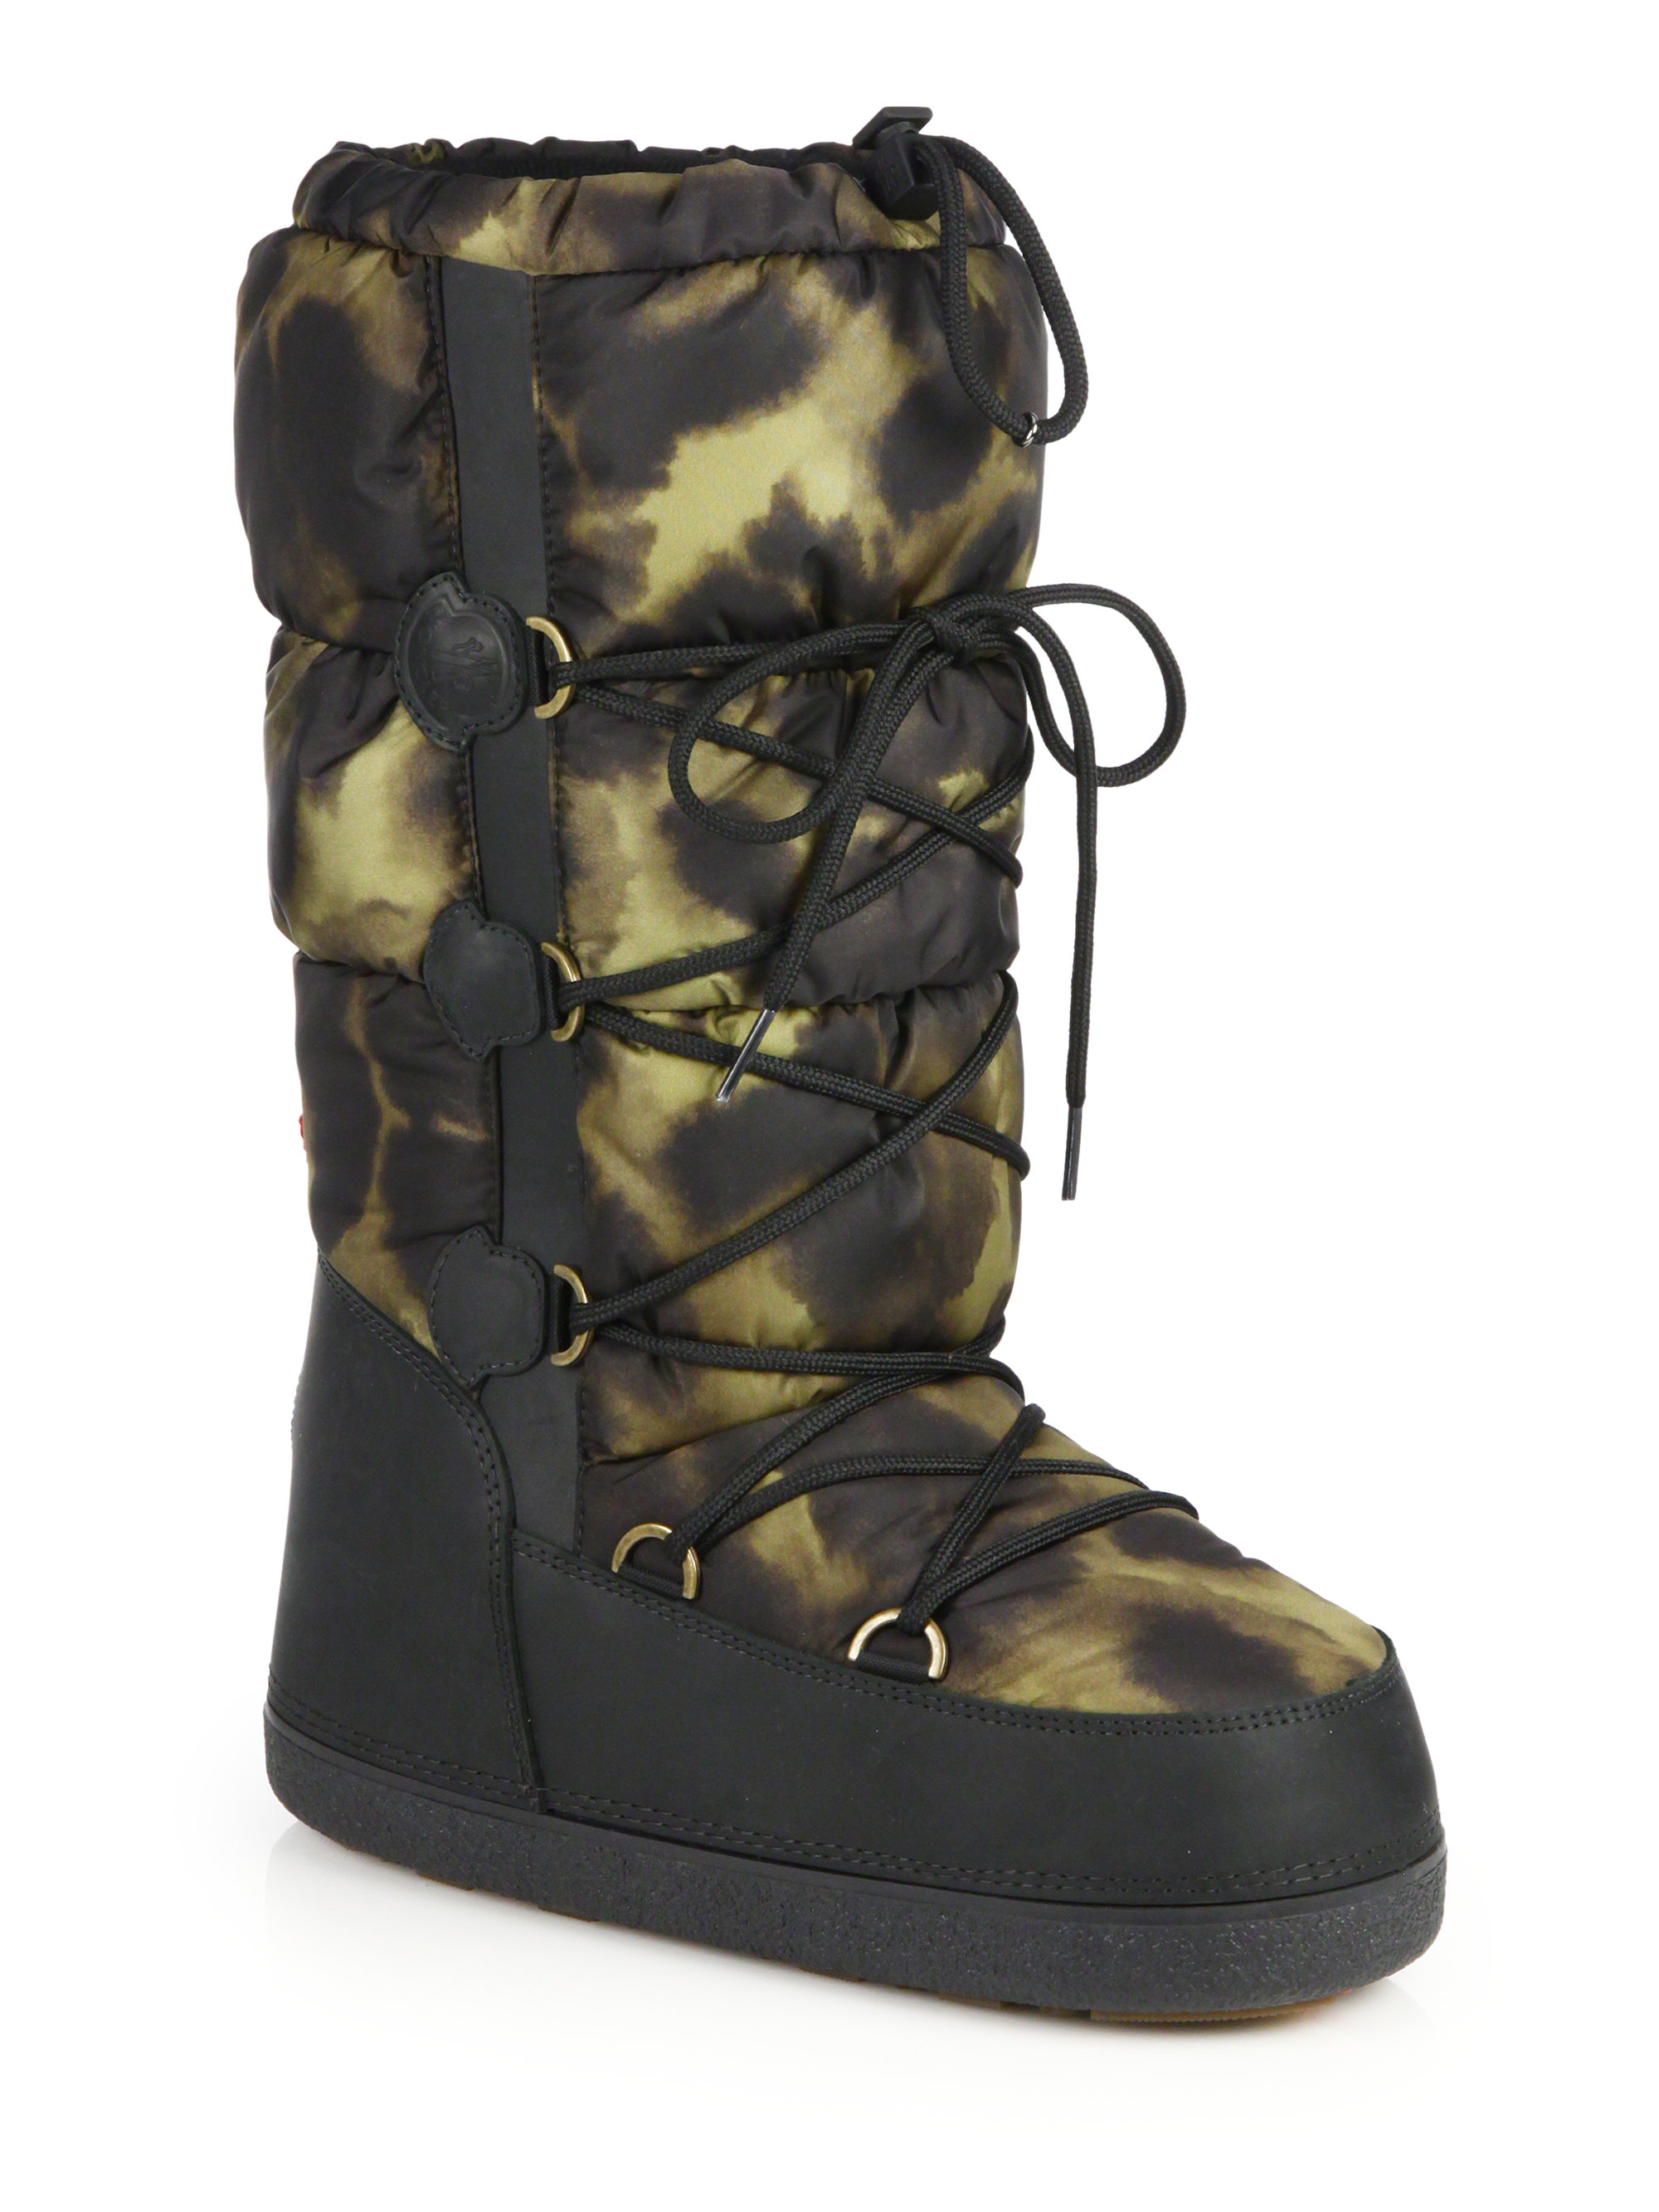 Lyst - Moncler Leopard-Print Quilted Moon Boots in Black